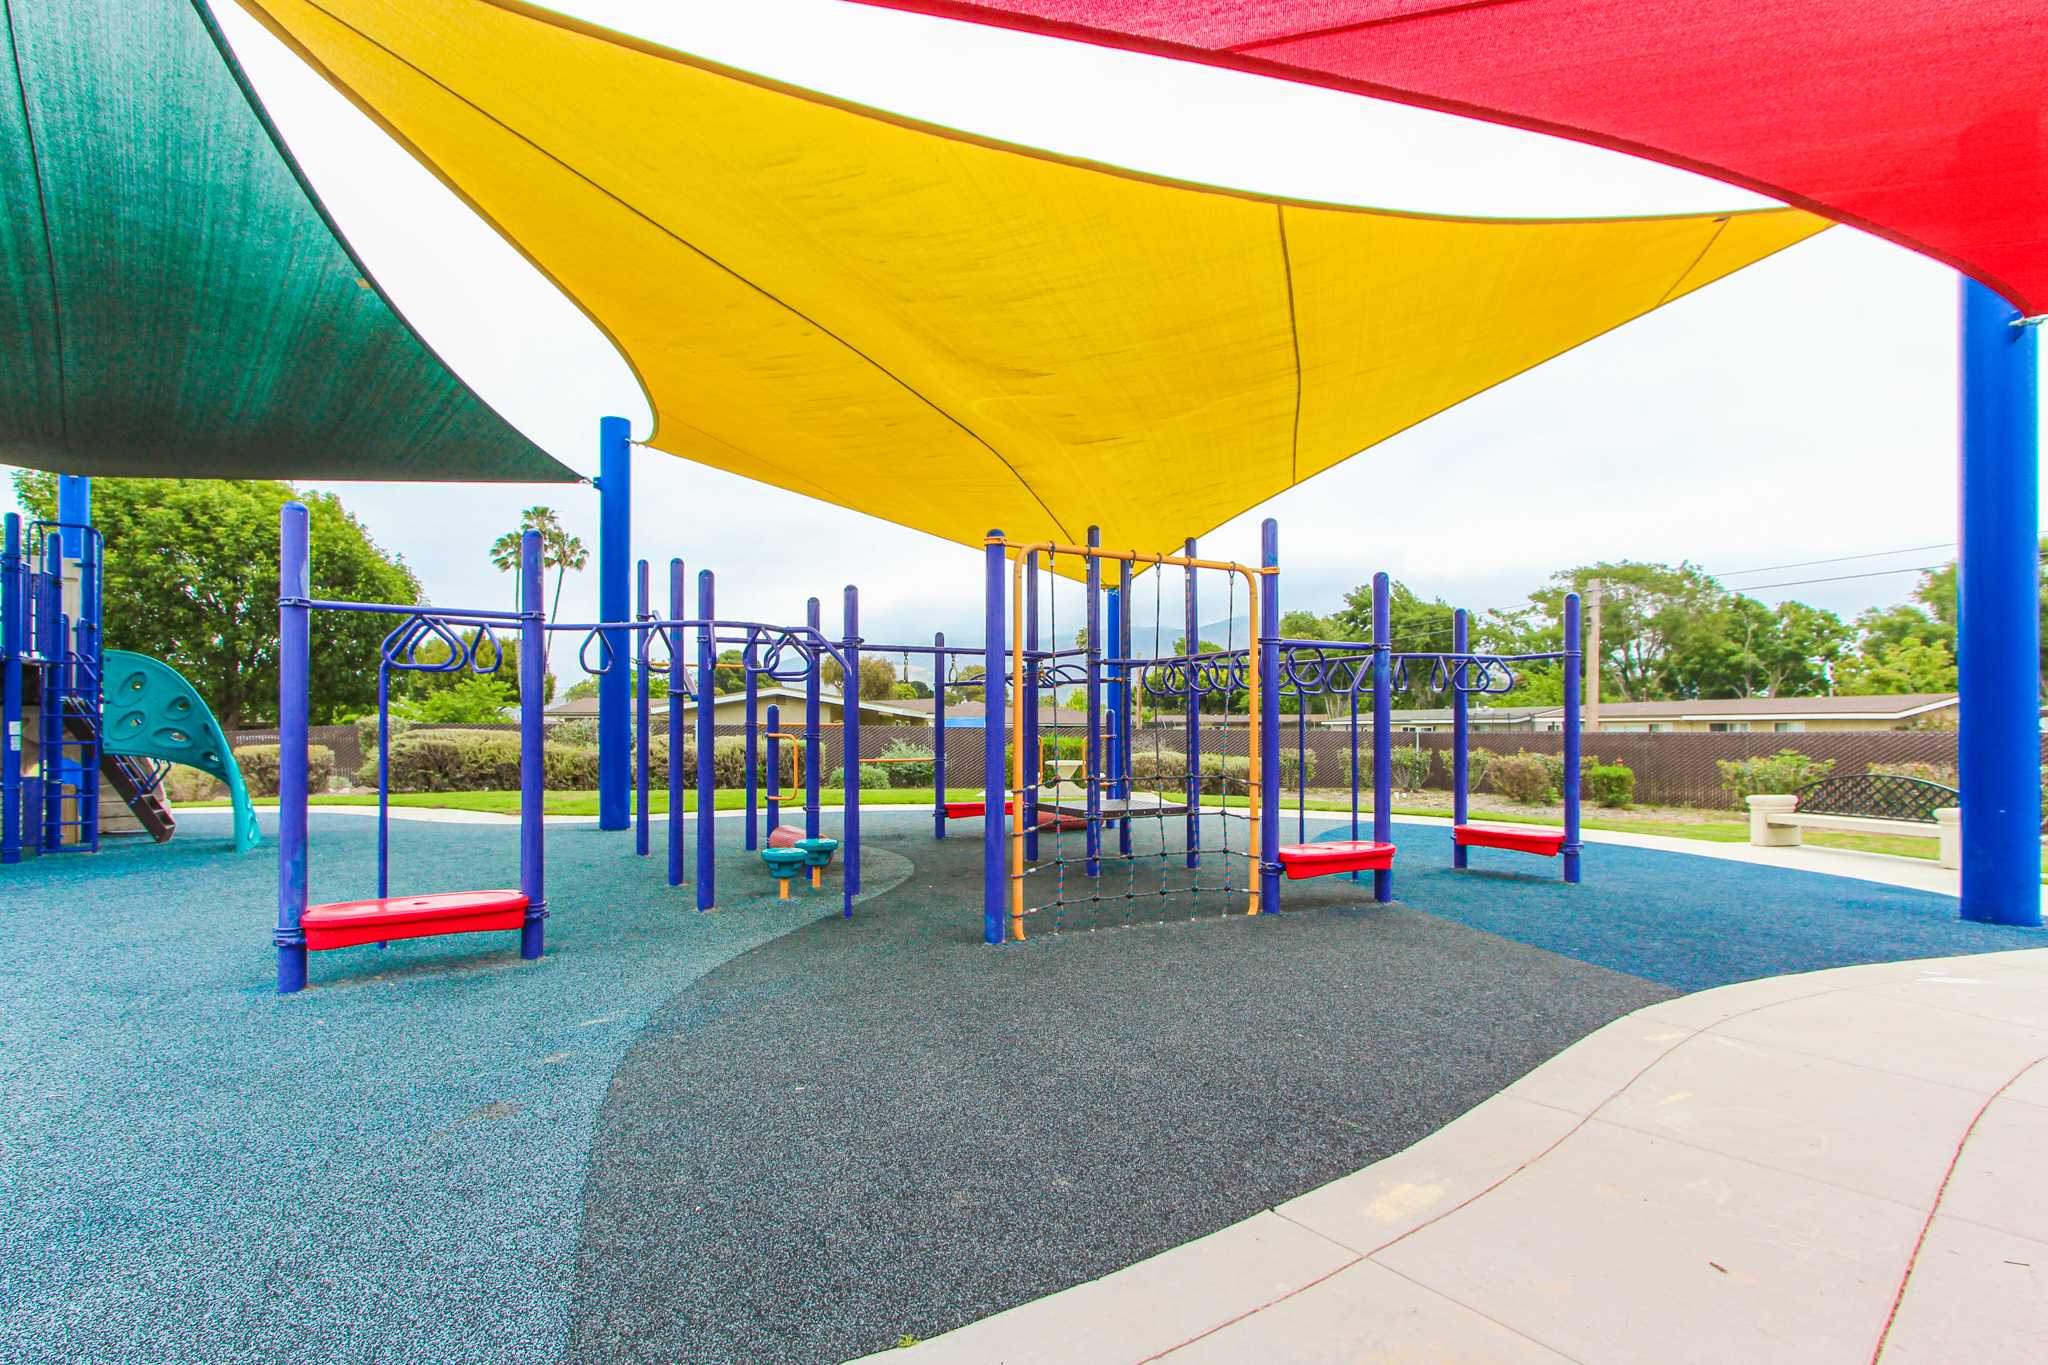 Another view of a shade covered playground at Santa Rosa in Point Mugu, California